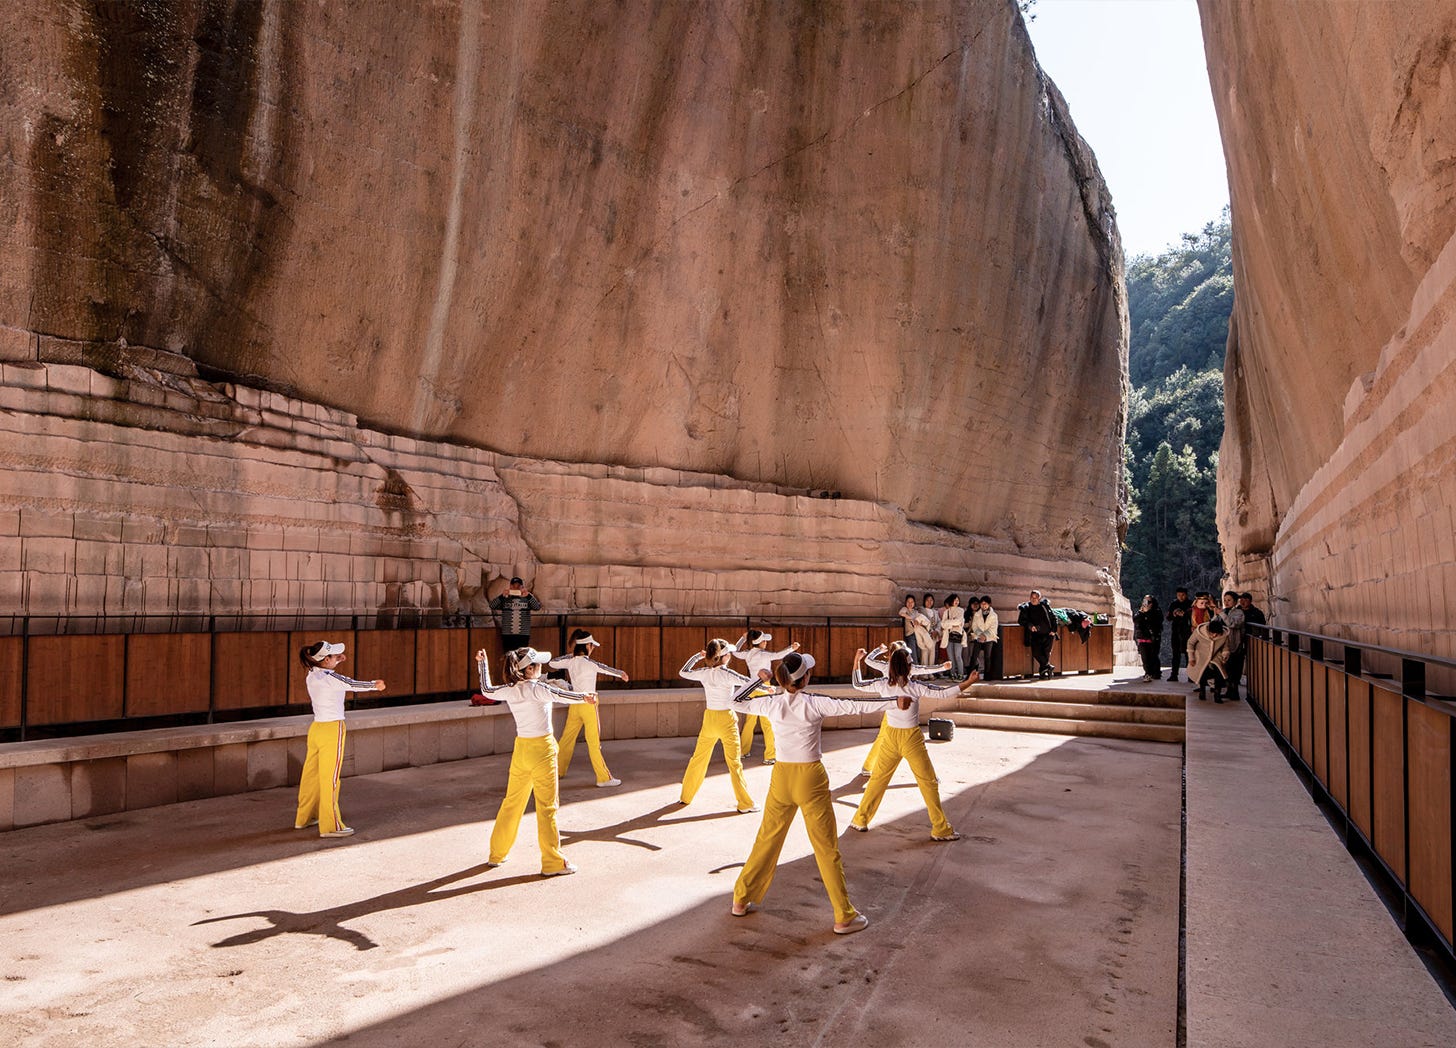 Dancers in yellow pants and white shirts perform on a recessed rectangular "stage" set within a rock quarry; beyond them, visitors watch the performance and a narrow opening reveals trees and a hill in the background